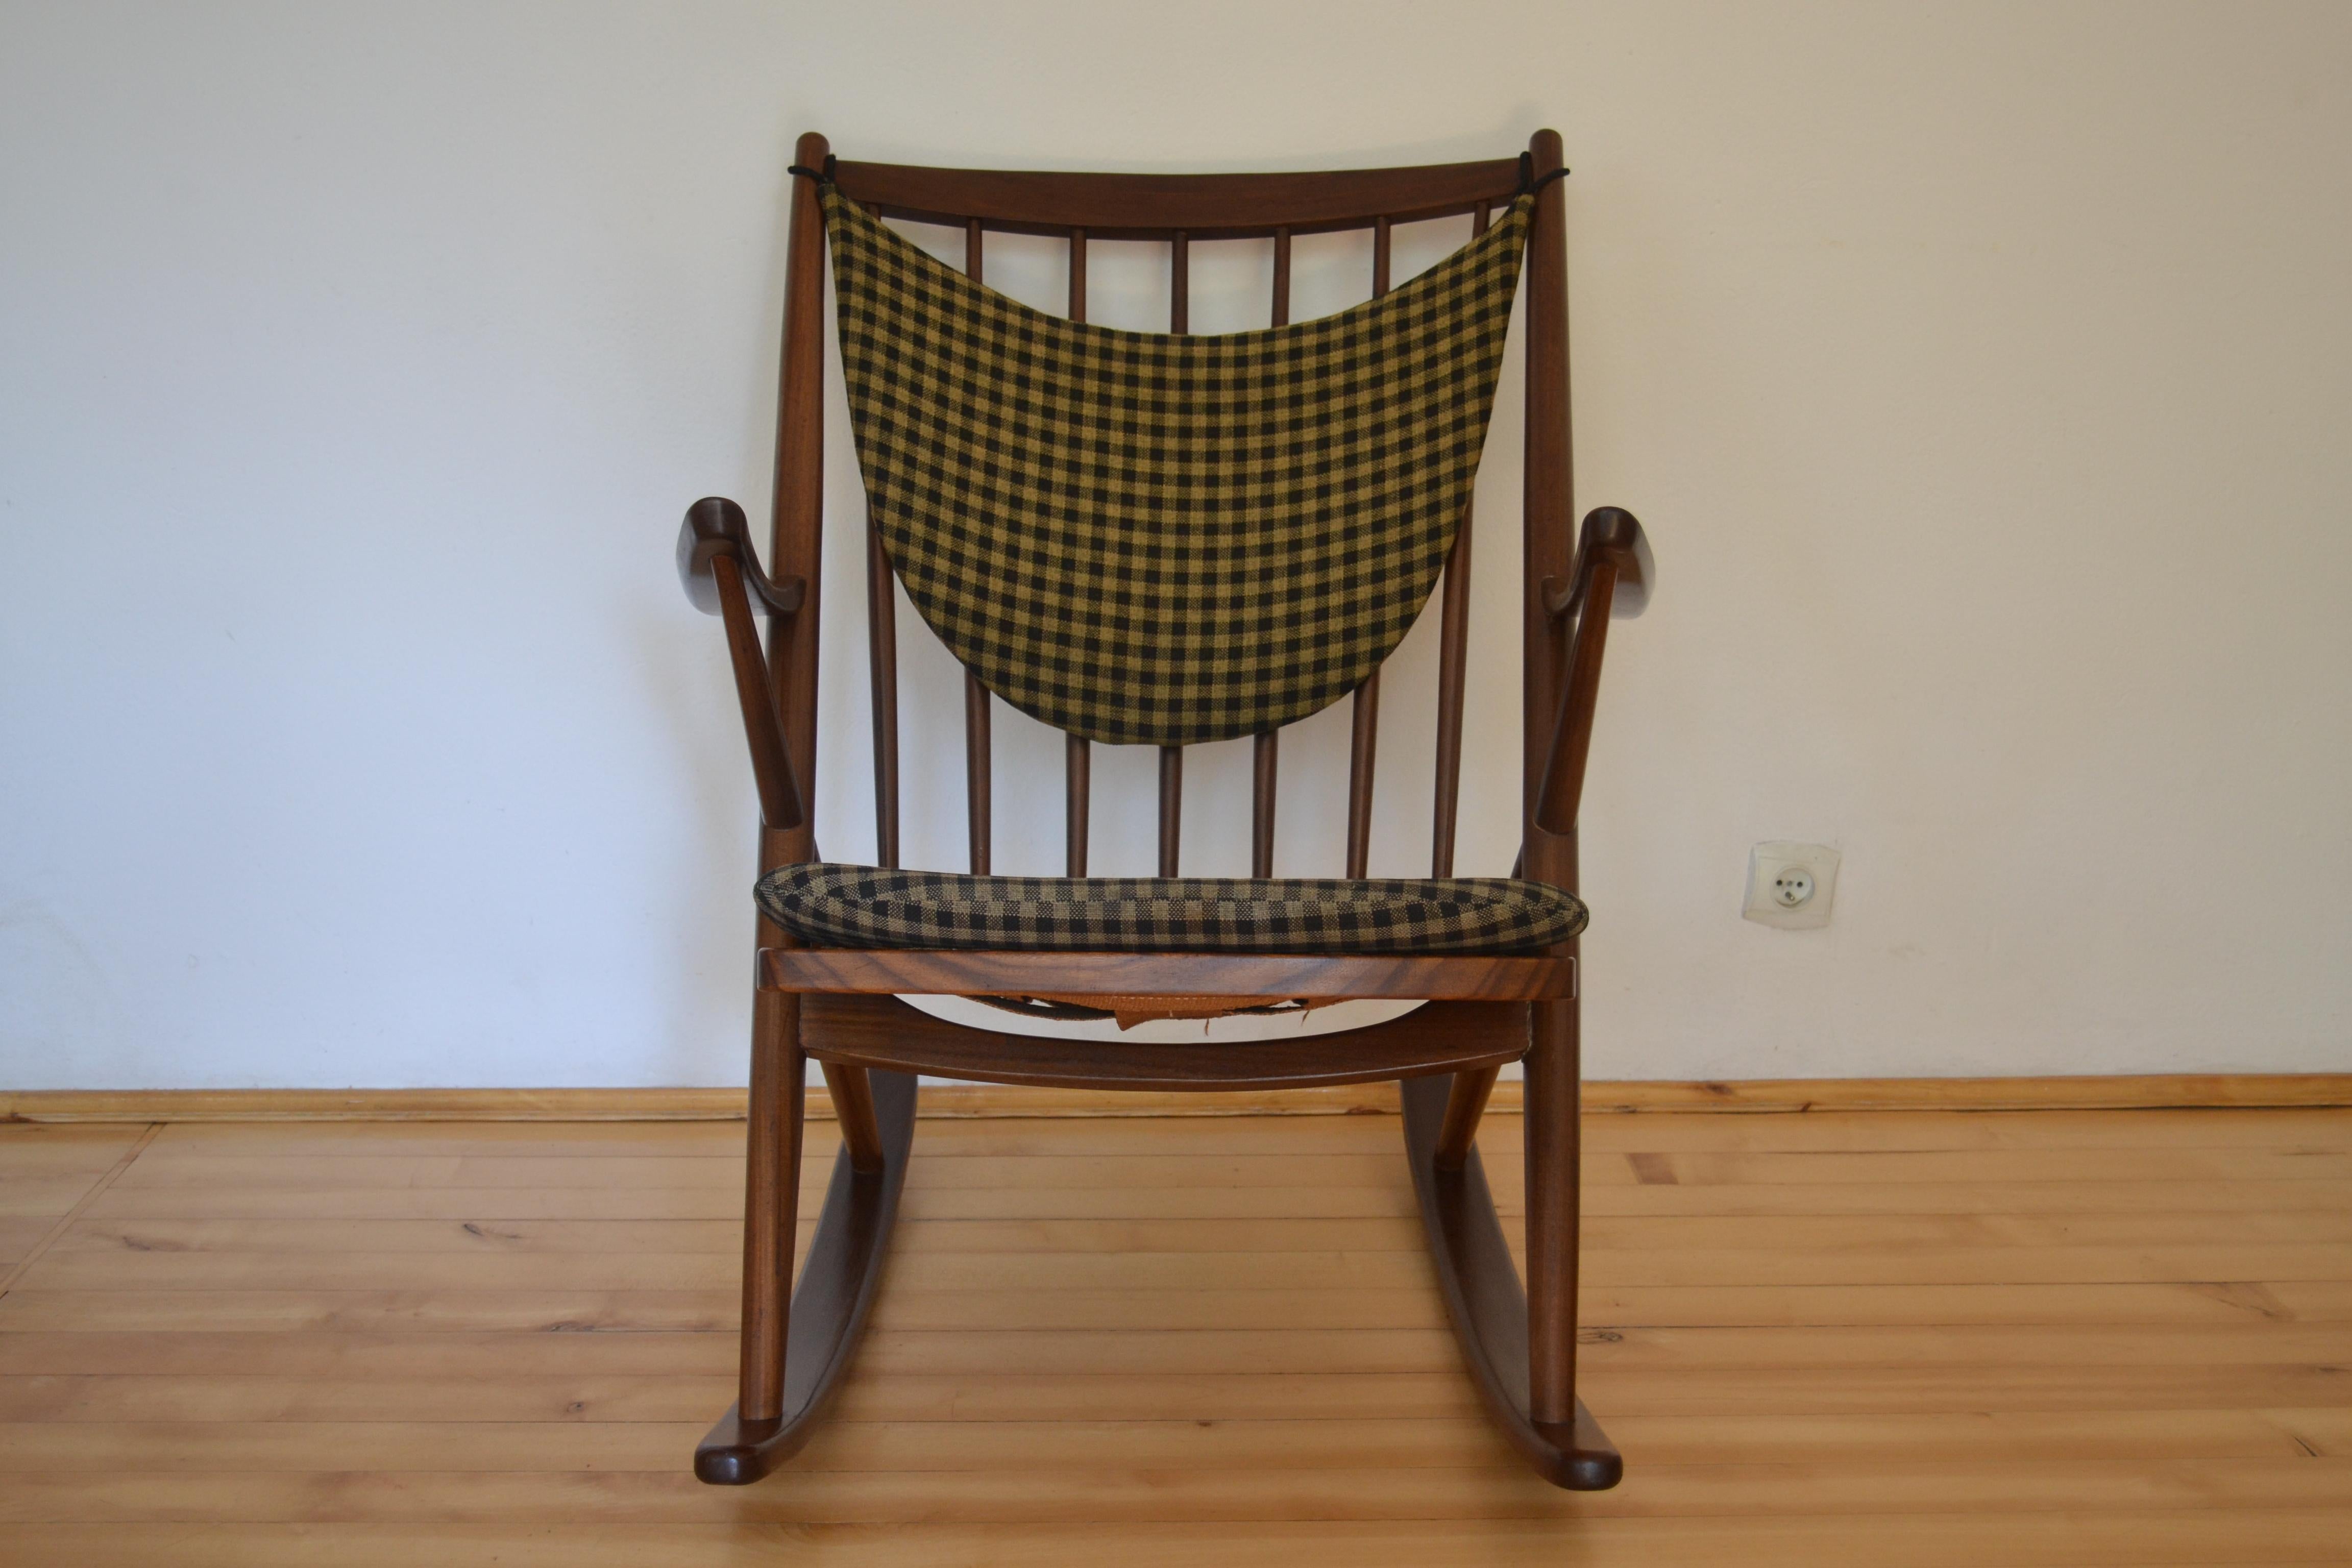 
This palisander rocking chair, model 182, was designed by Frank Reenskaug for Bramin, circa 1960.